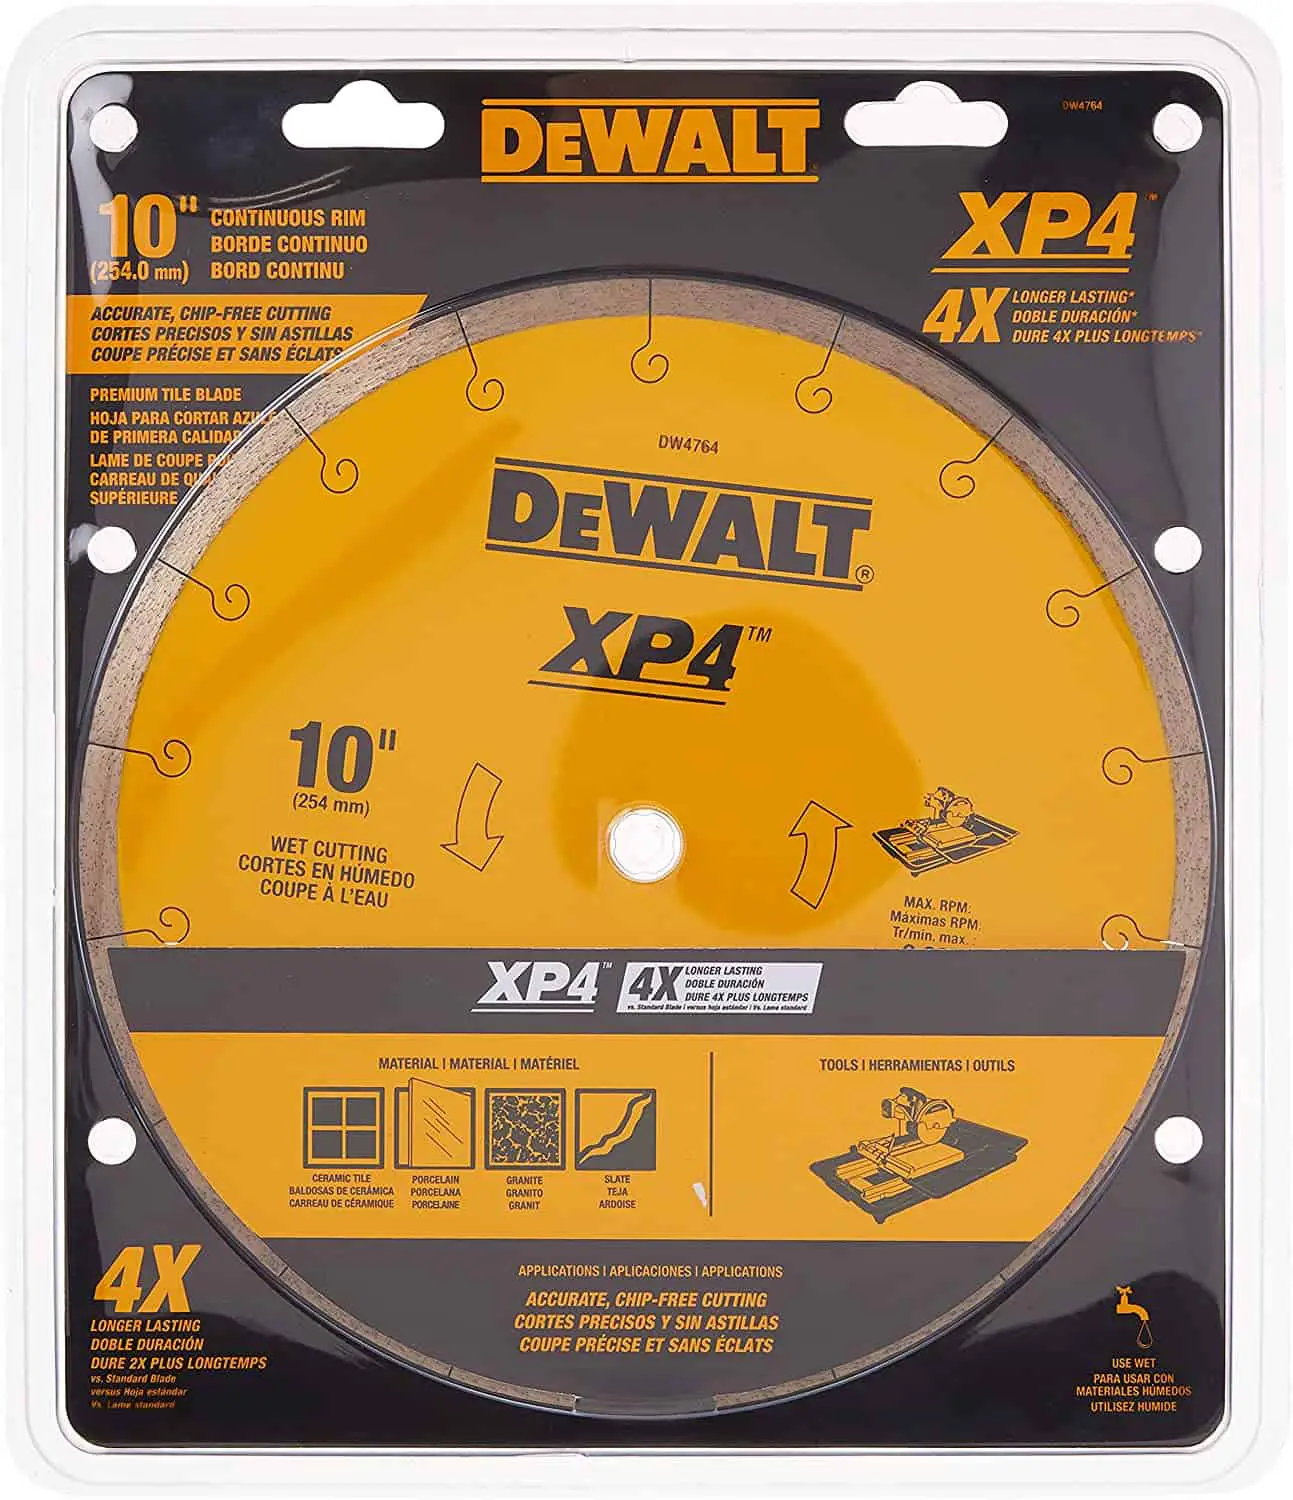 Overall best tile saw blade for wet cutting: DEWALT XP4